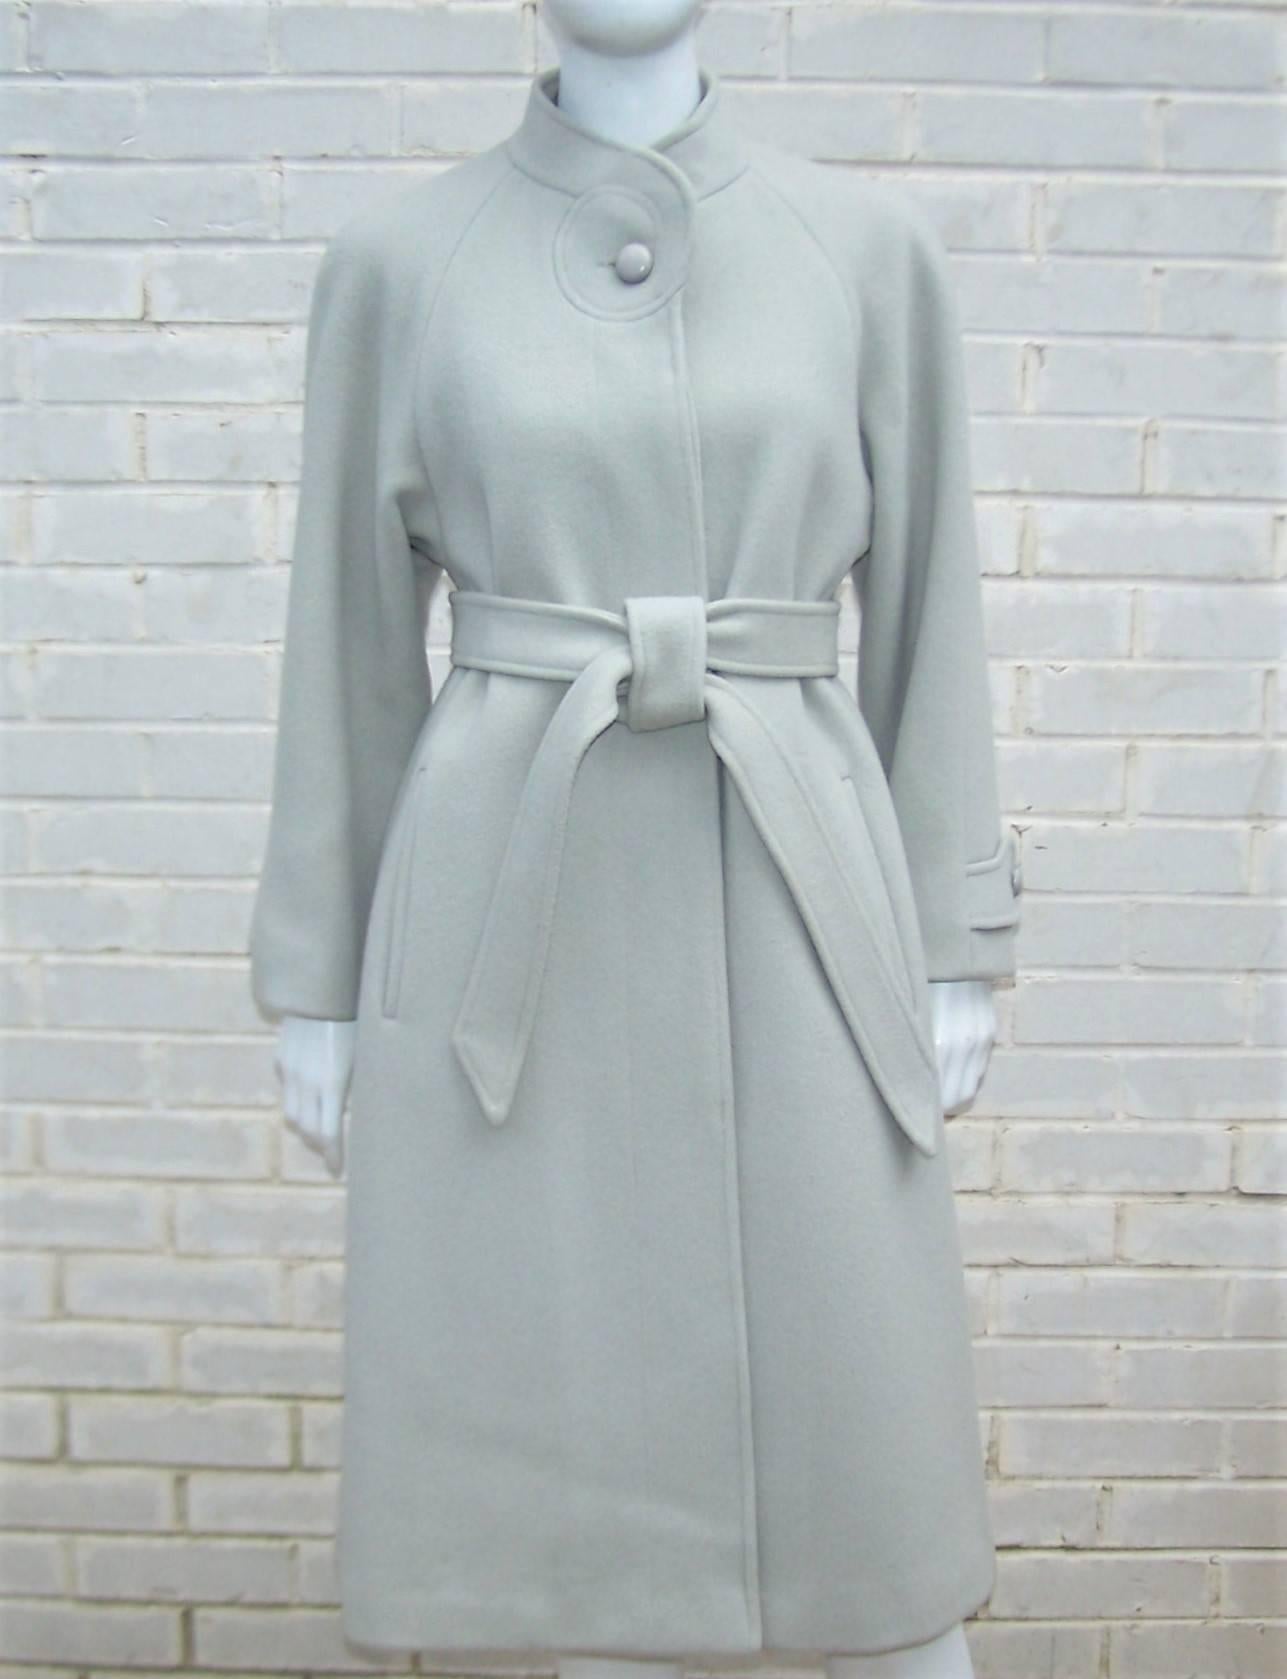 Zandra Rhodes' interest in organic forms is at play in the stylized details of this C.1980 light gray wool overcoat for Green & Makofsky.  The cozy design has hidden buttons at the front with a swirled detail at the mandarin style collar which is